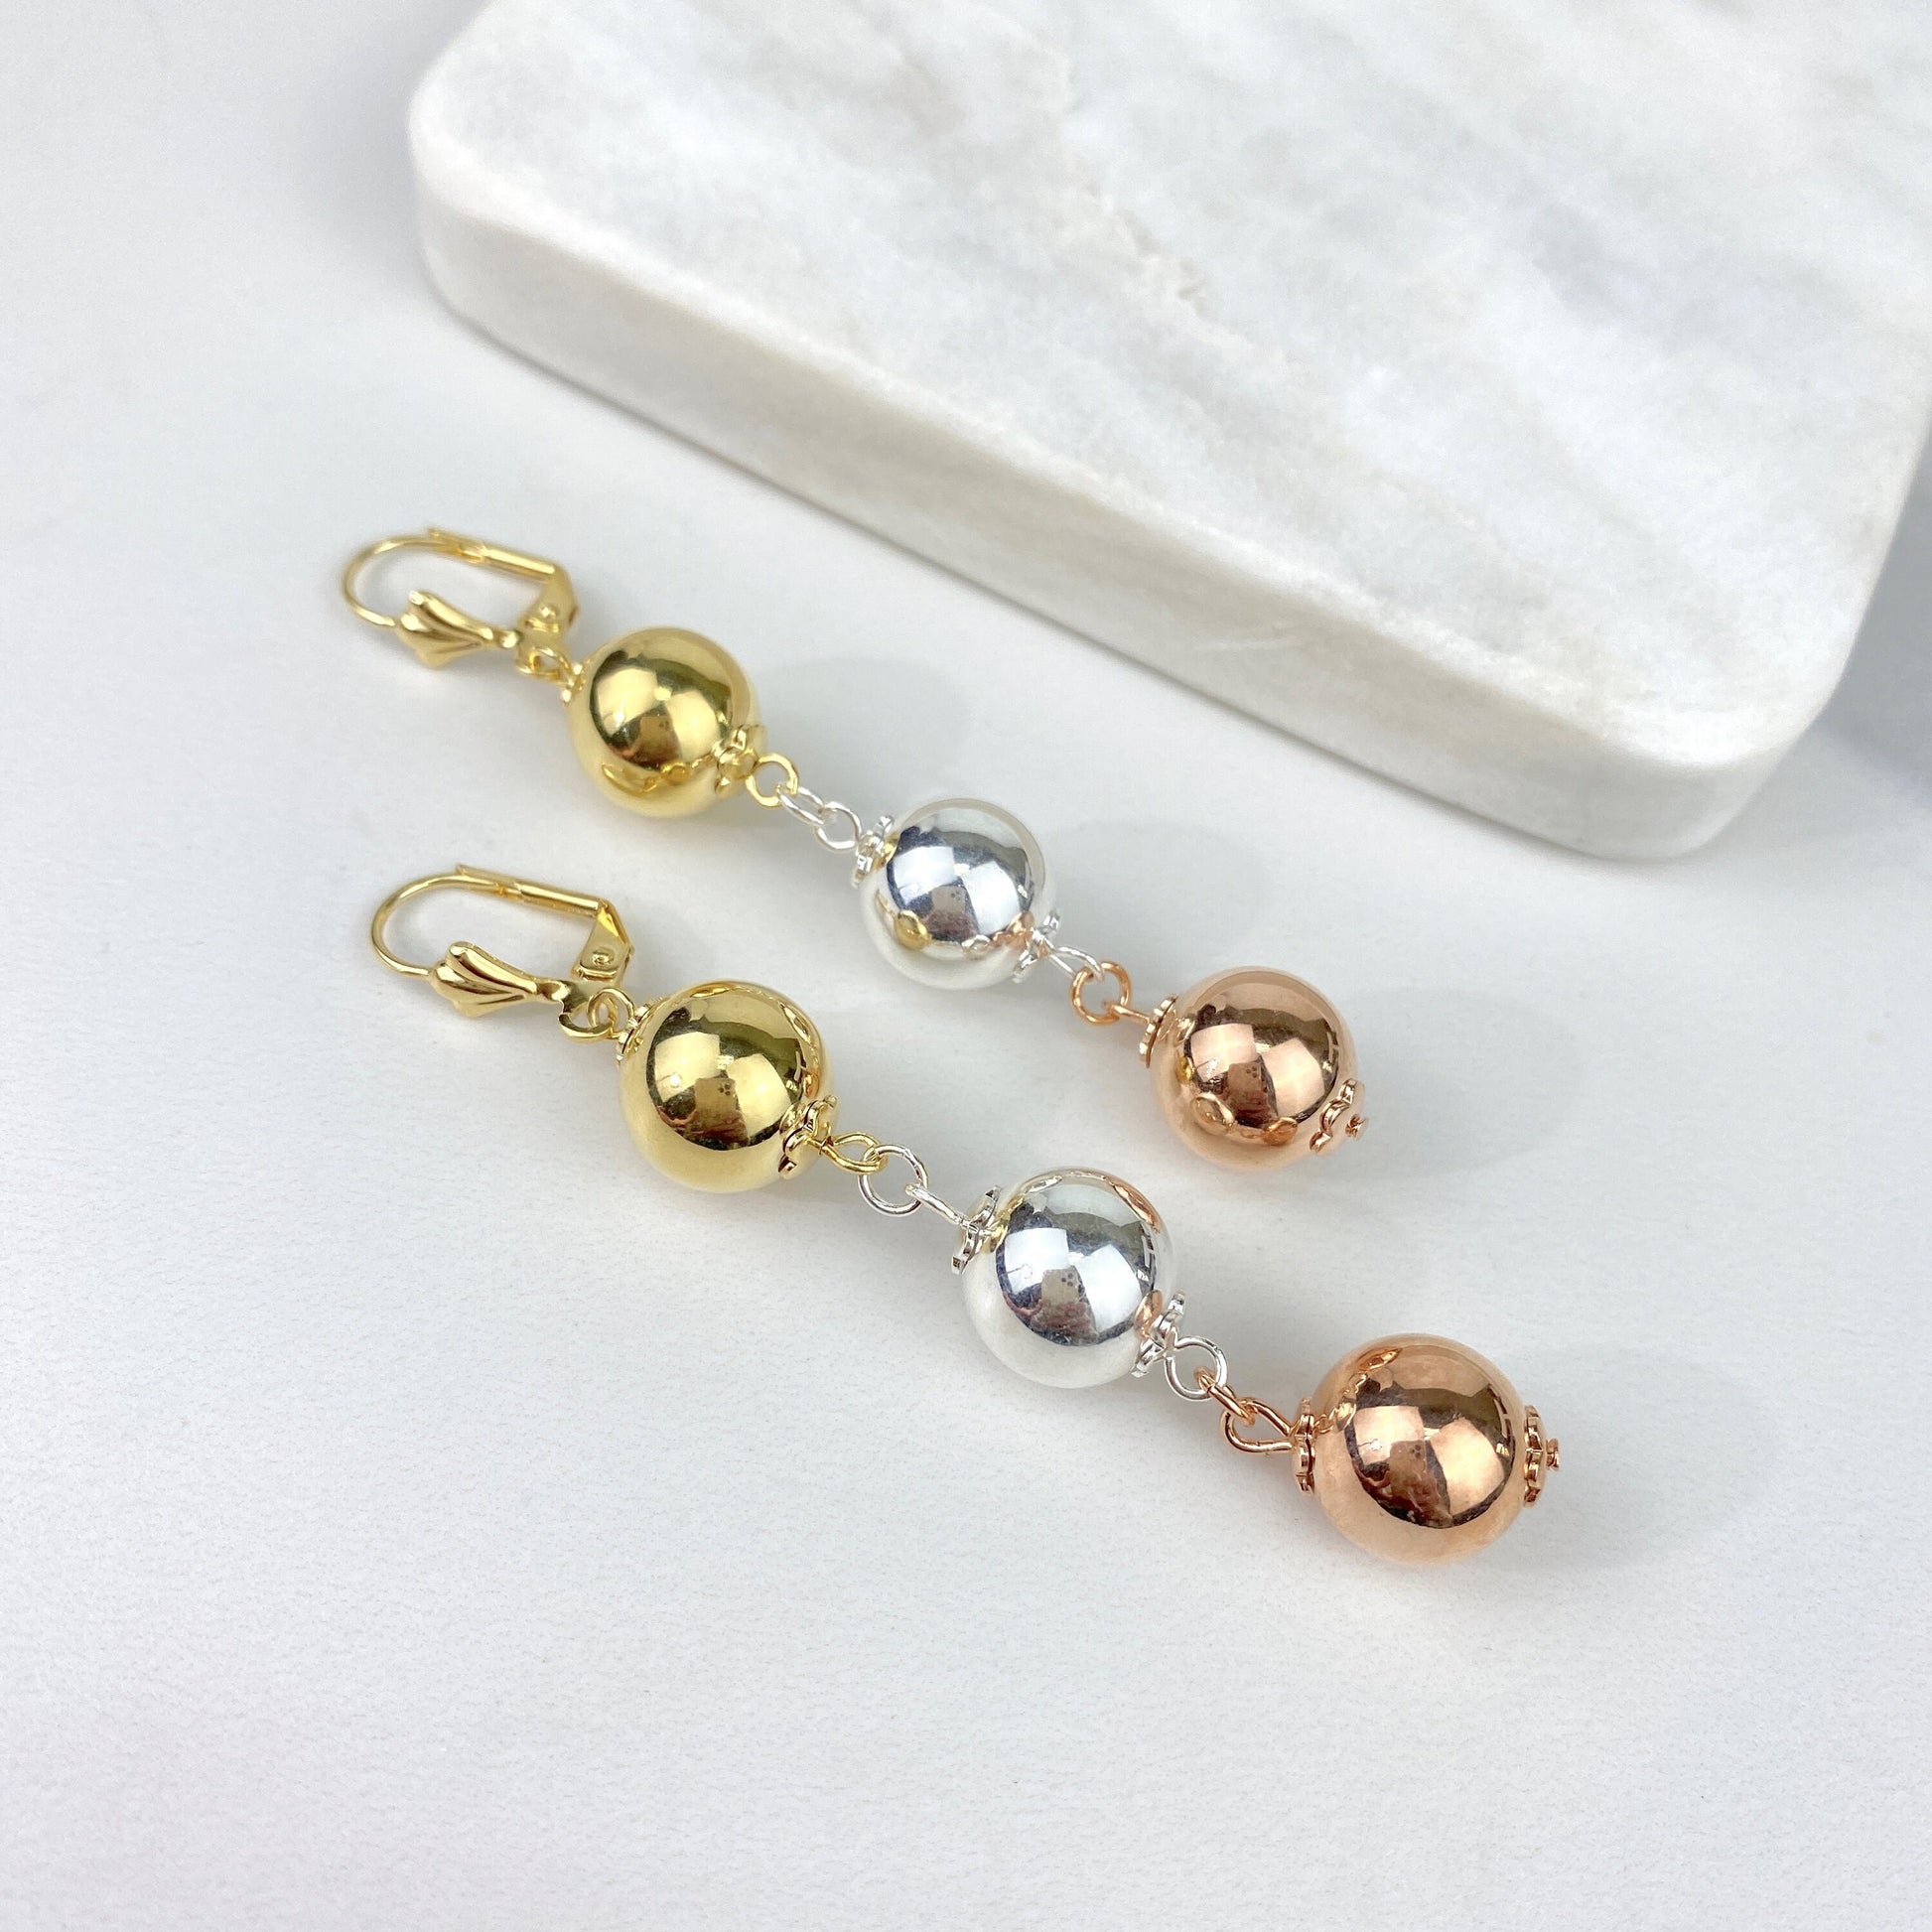 18k Gold Filled Three Tone Balls Dangle Earrings Wholesale Jewelry Making Supplies